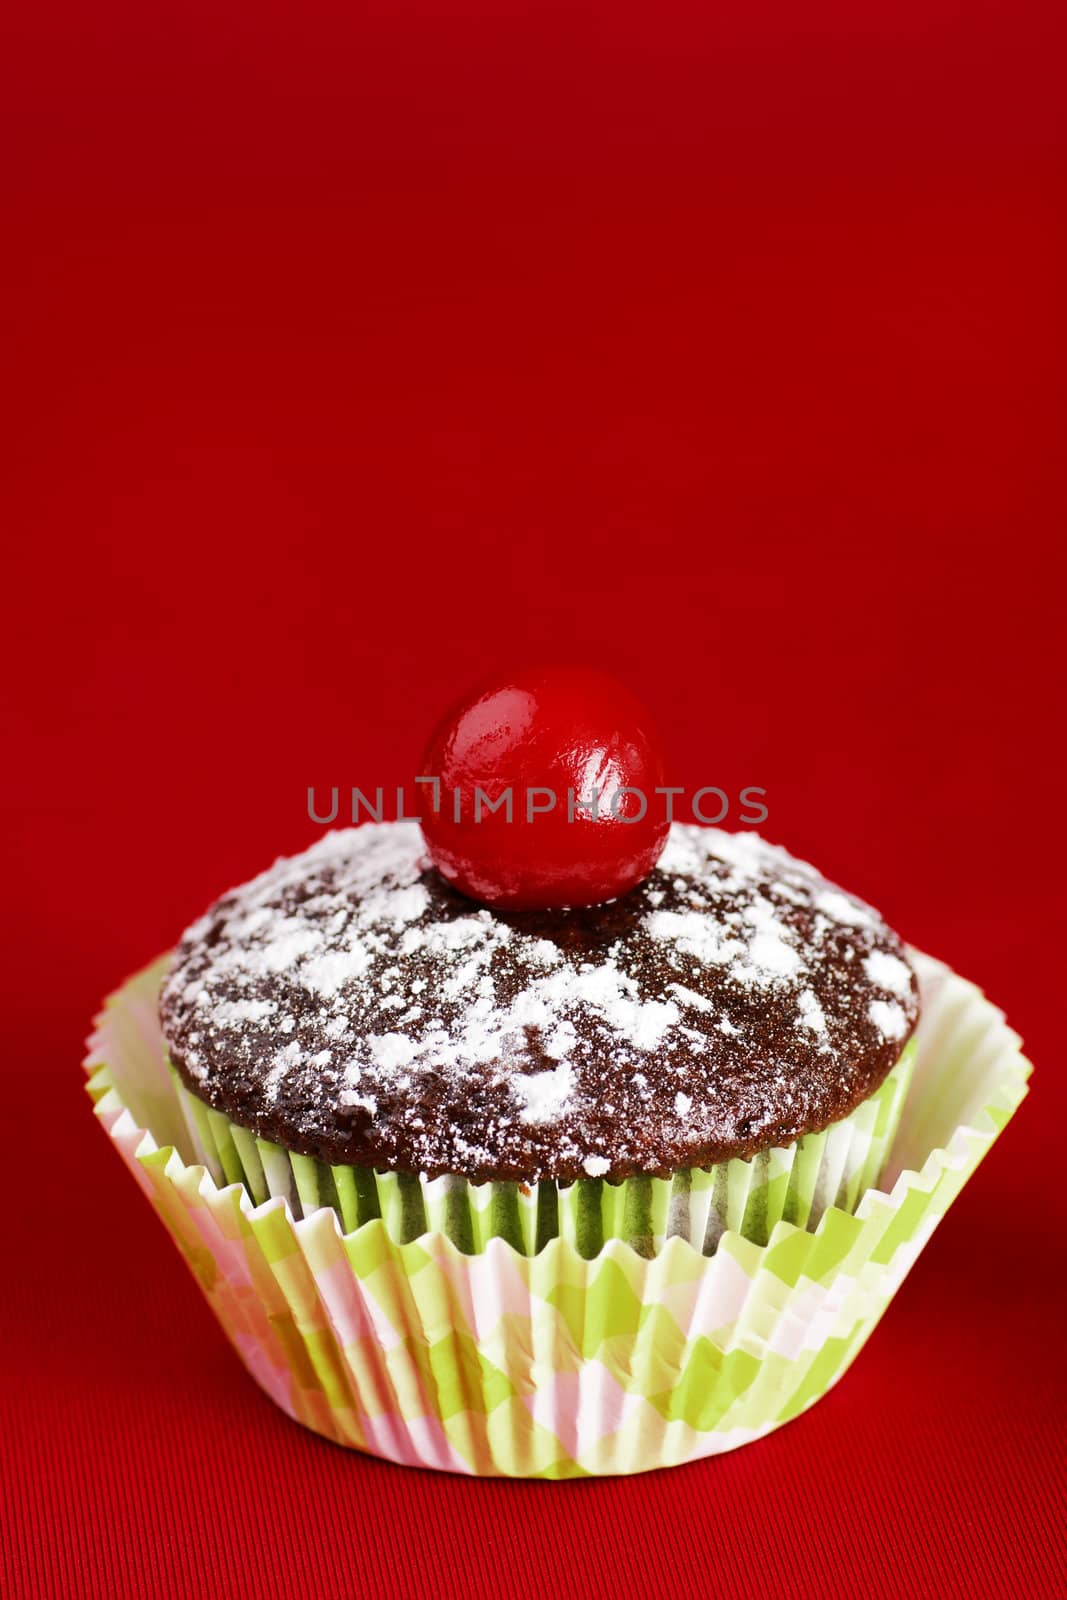 One chocolate cupcake with cherry over red by Mirage3